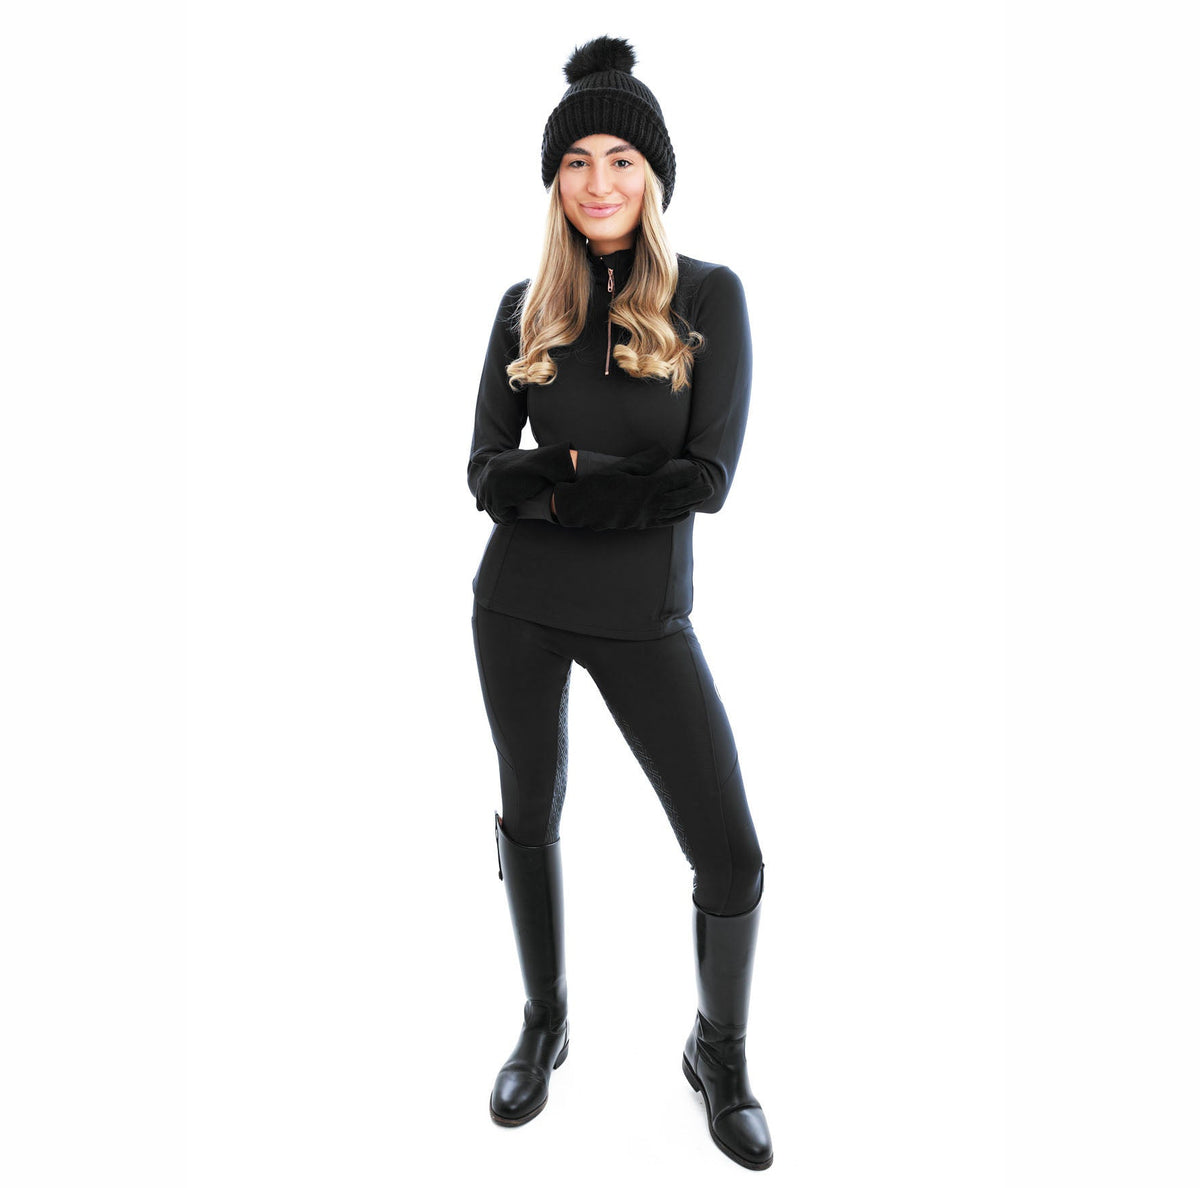 Winter Thermal ON SALE - Riding Leggings and Base Layer - CT